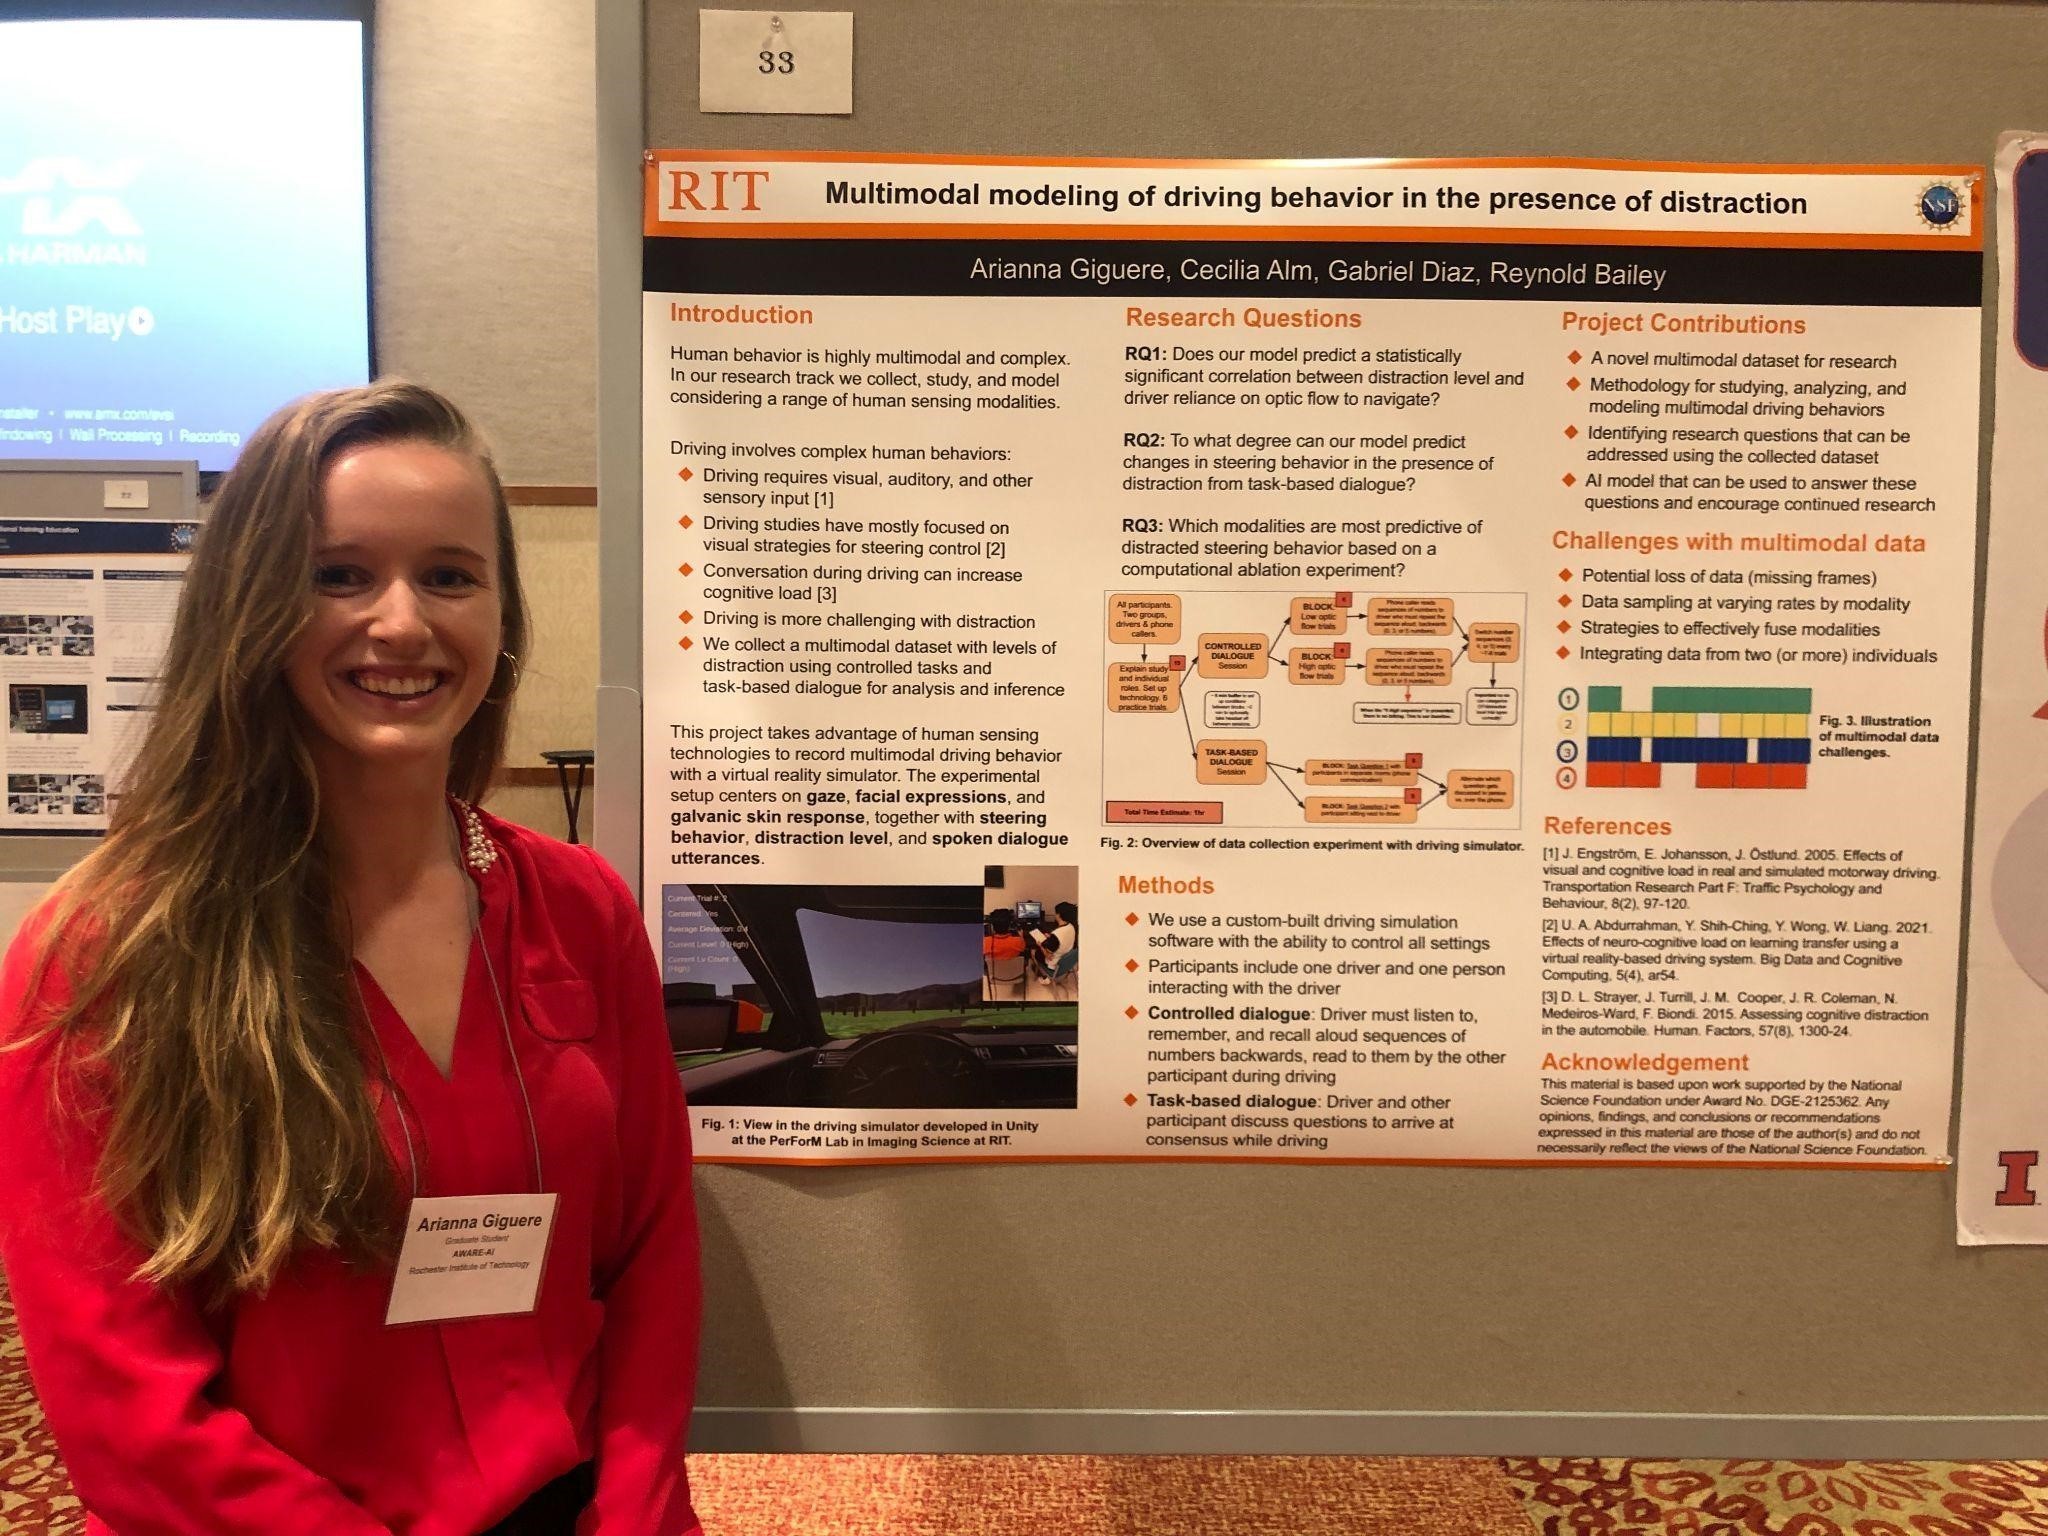 Trainee Arianna Giguere presented on her research track project Multimodal Modeling of Driving Behavior in the Presence of Distraction at the NSF NRT Annual Meeting 2022 at Virginia Tech.